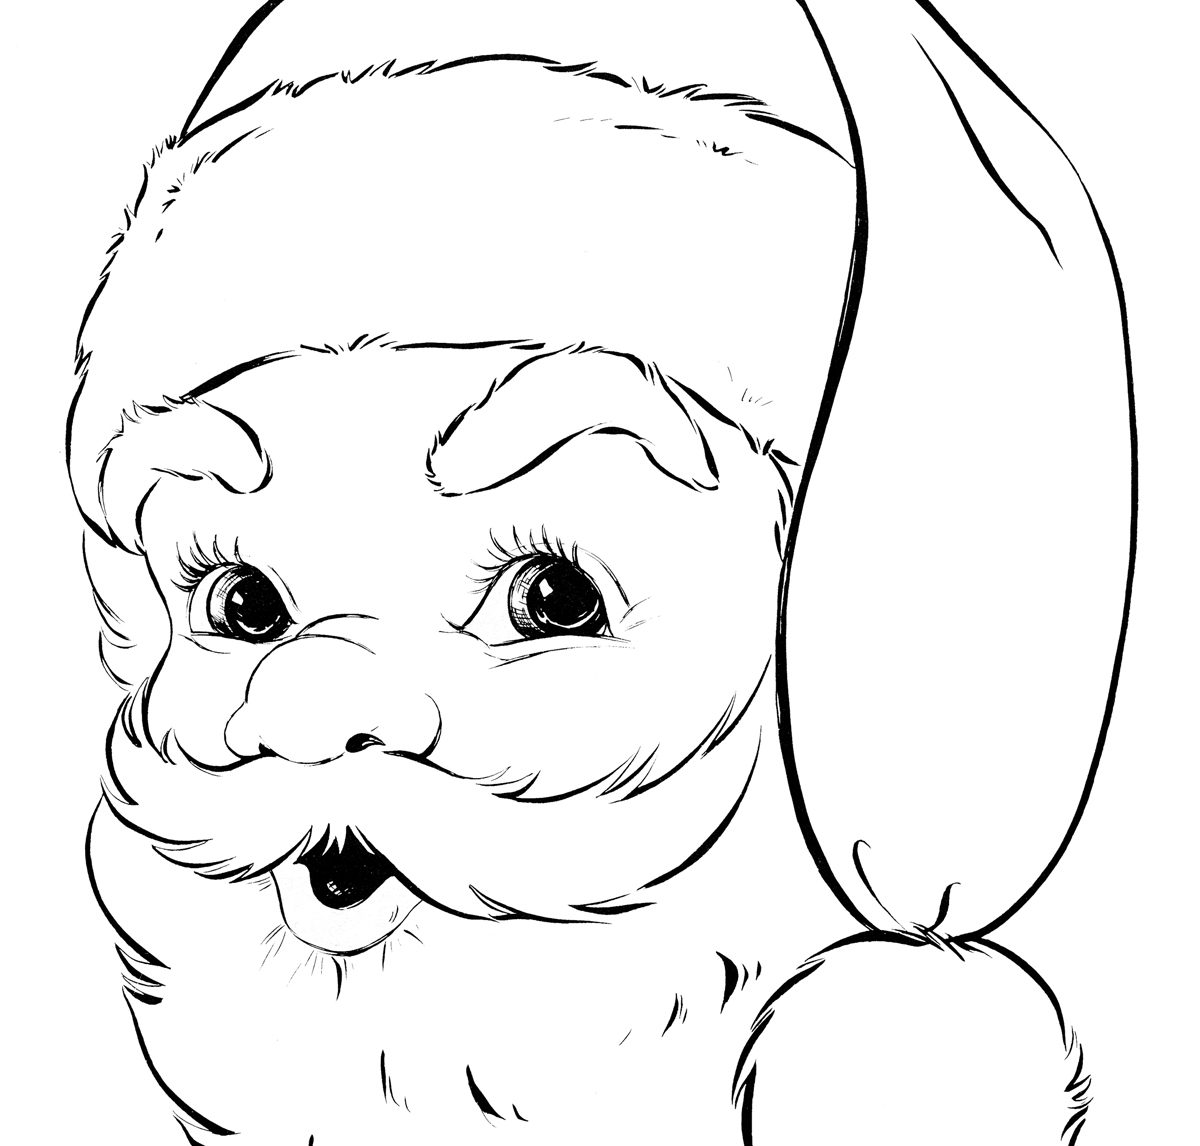 Free christmas coloring pages